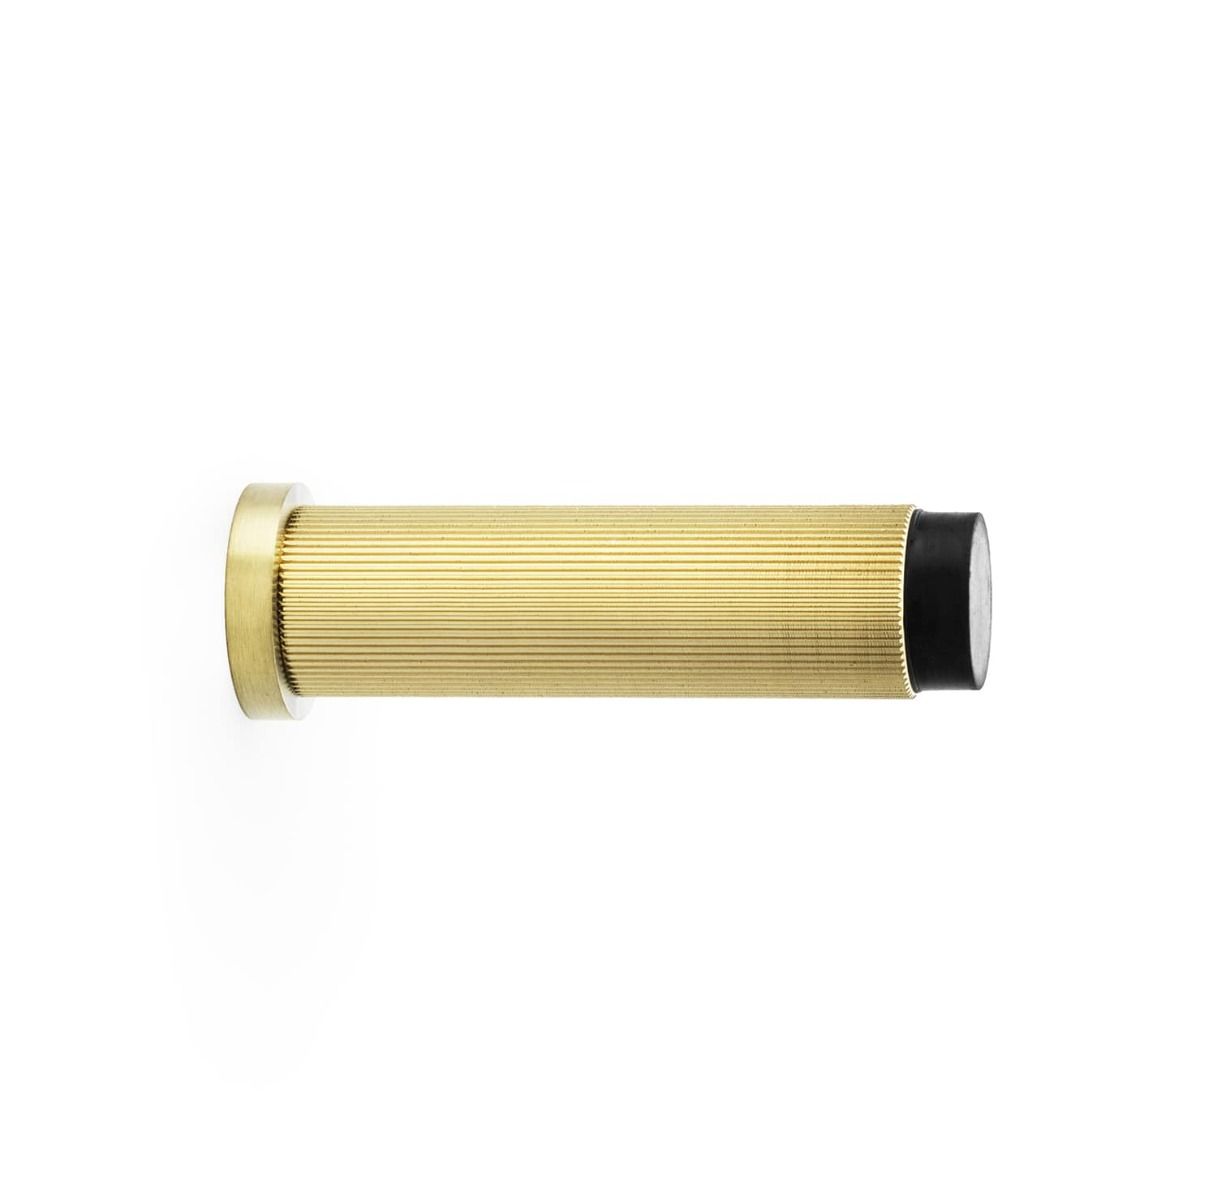 Alexander And Wilks Projection Cyl. Doorstop Reeded 75X20mm Satin Brass Pvd AW602-75-SBPVD